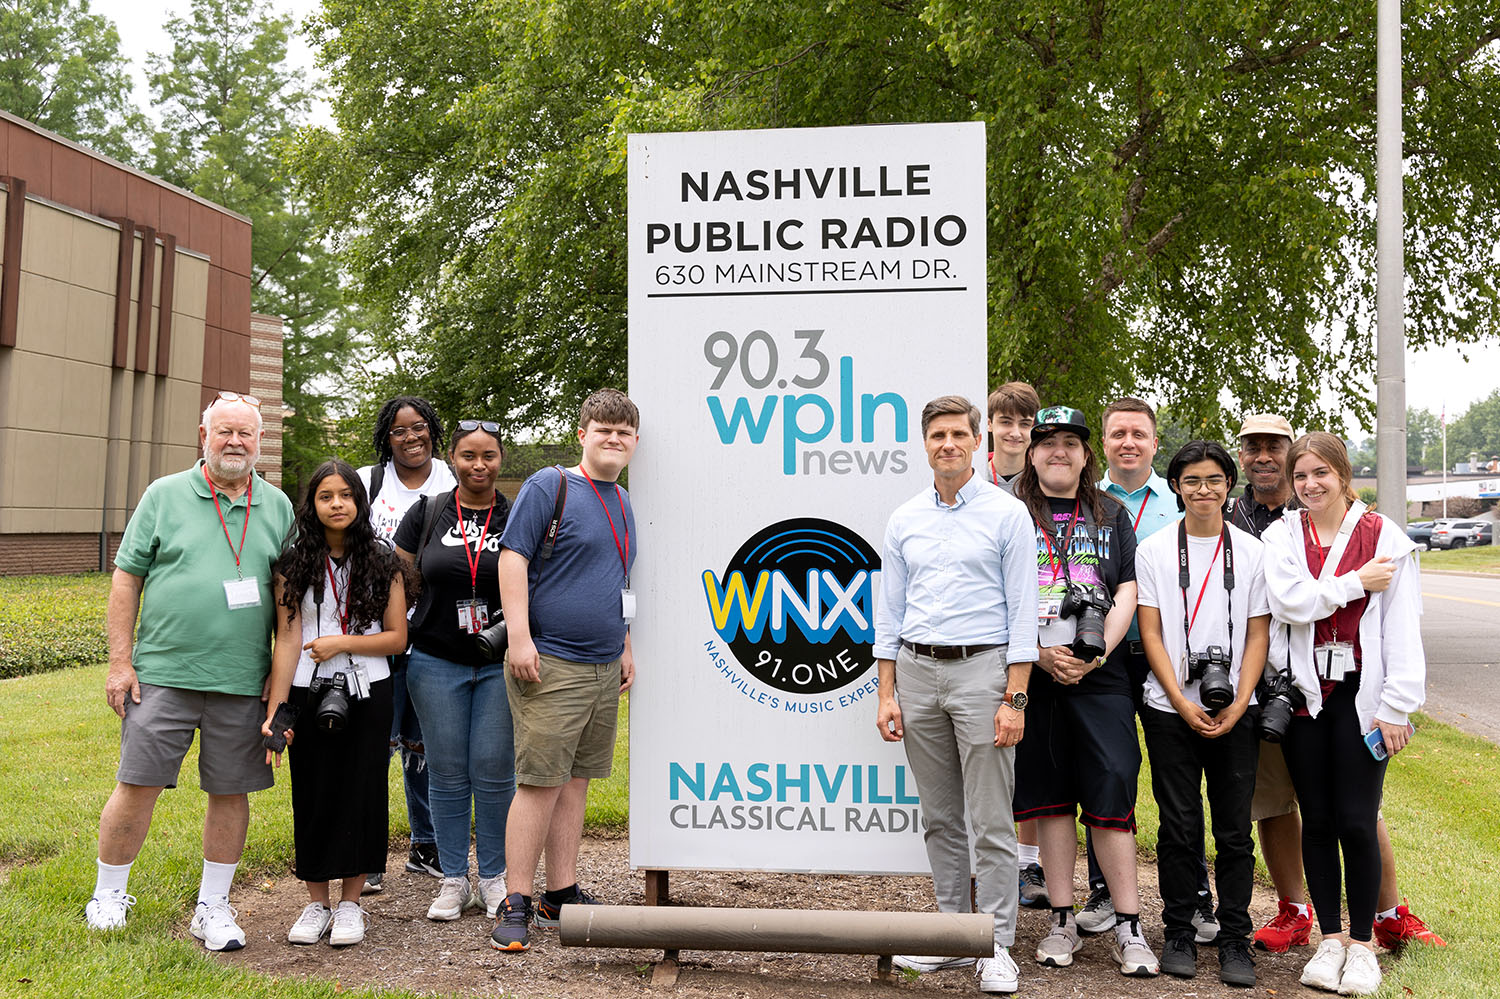 One of my responsibilities co-leading the multiplatform journalism track in the 2023 Exposure Film & Media Workshops for high school journalism students was to organize visits to three professional newsrooms in Nashville.